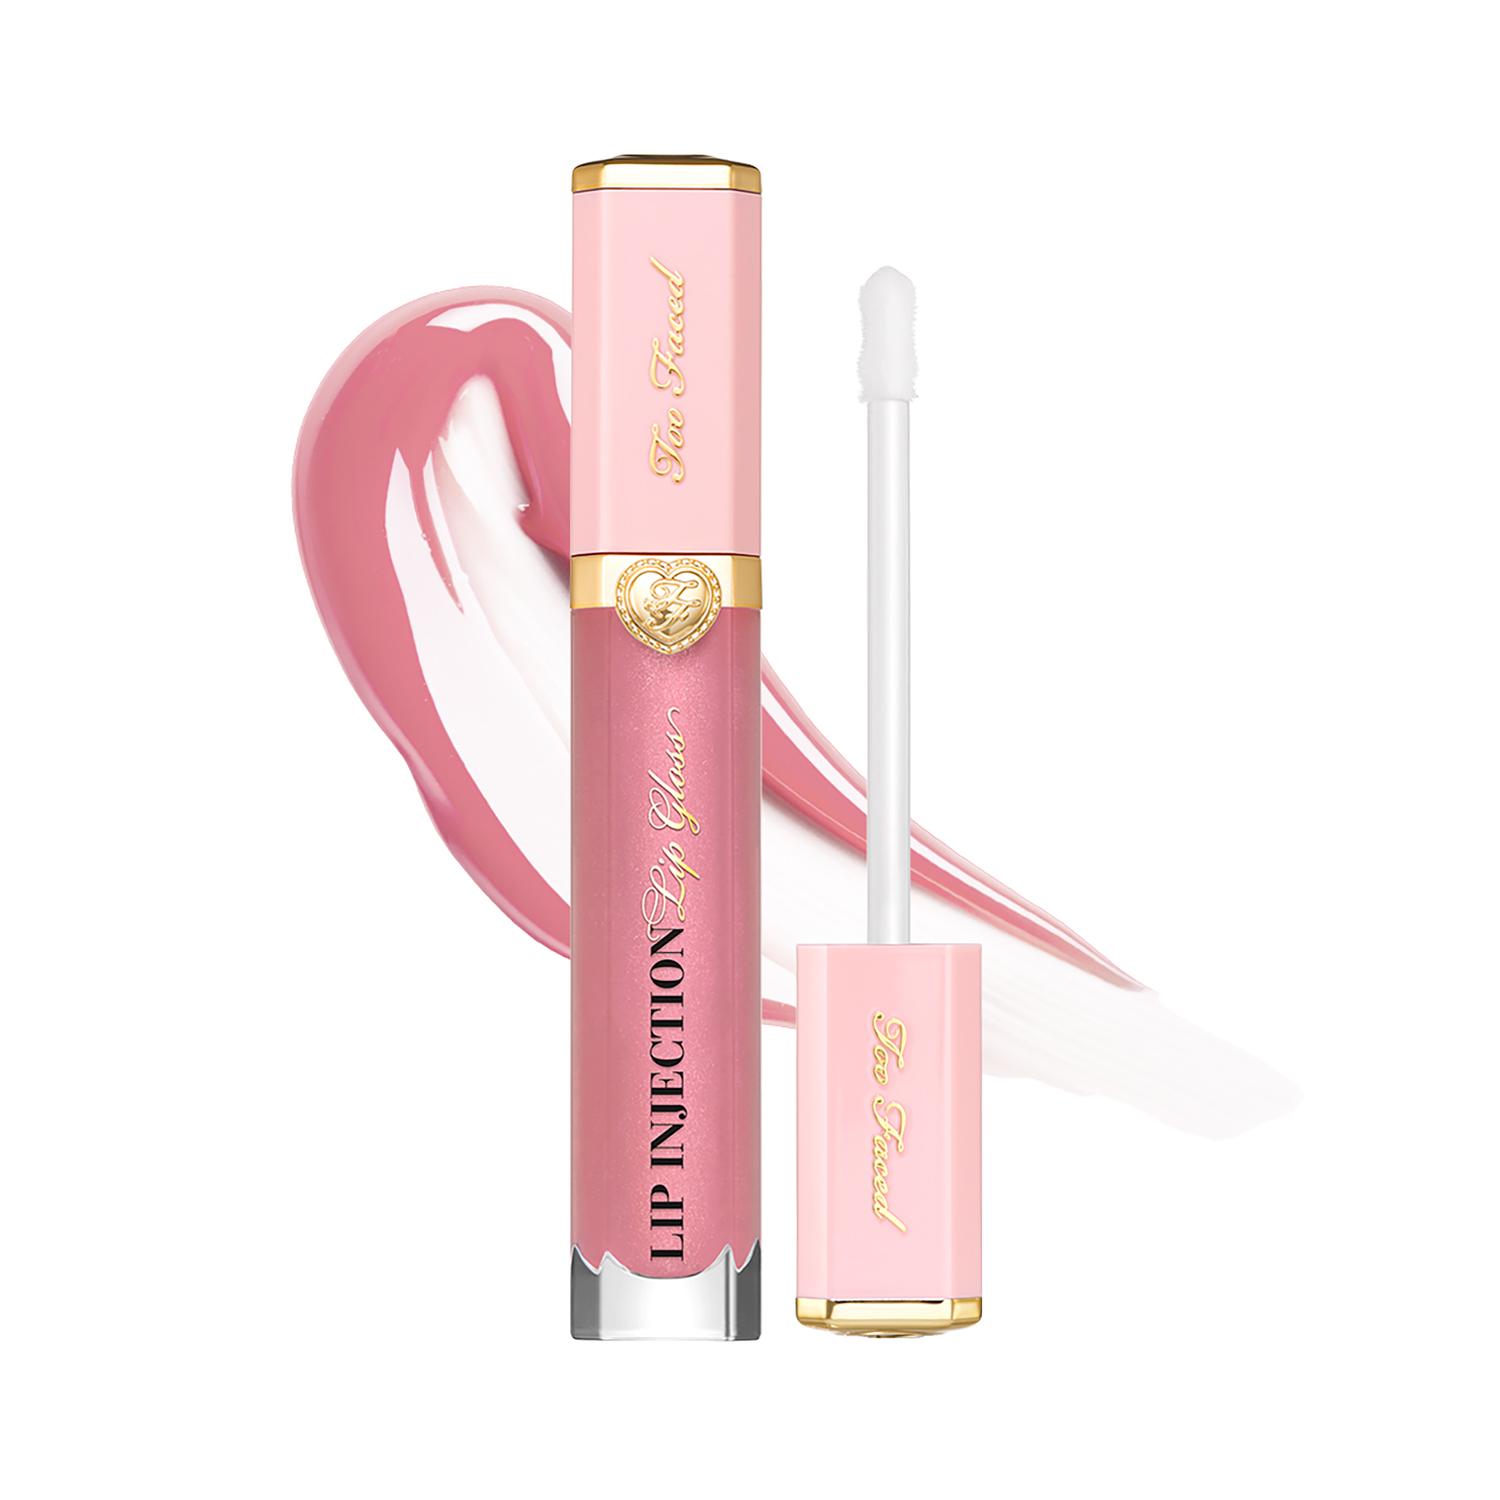 Too Faced | Too Faced Lip Injection Power Plumping Lip Gloss - Just Friends (7ml)